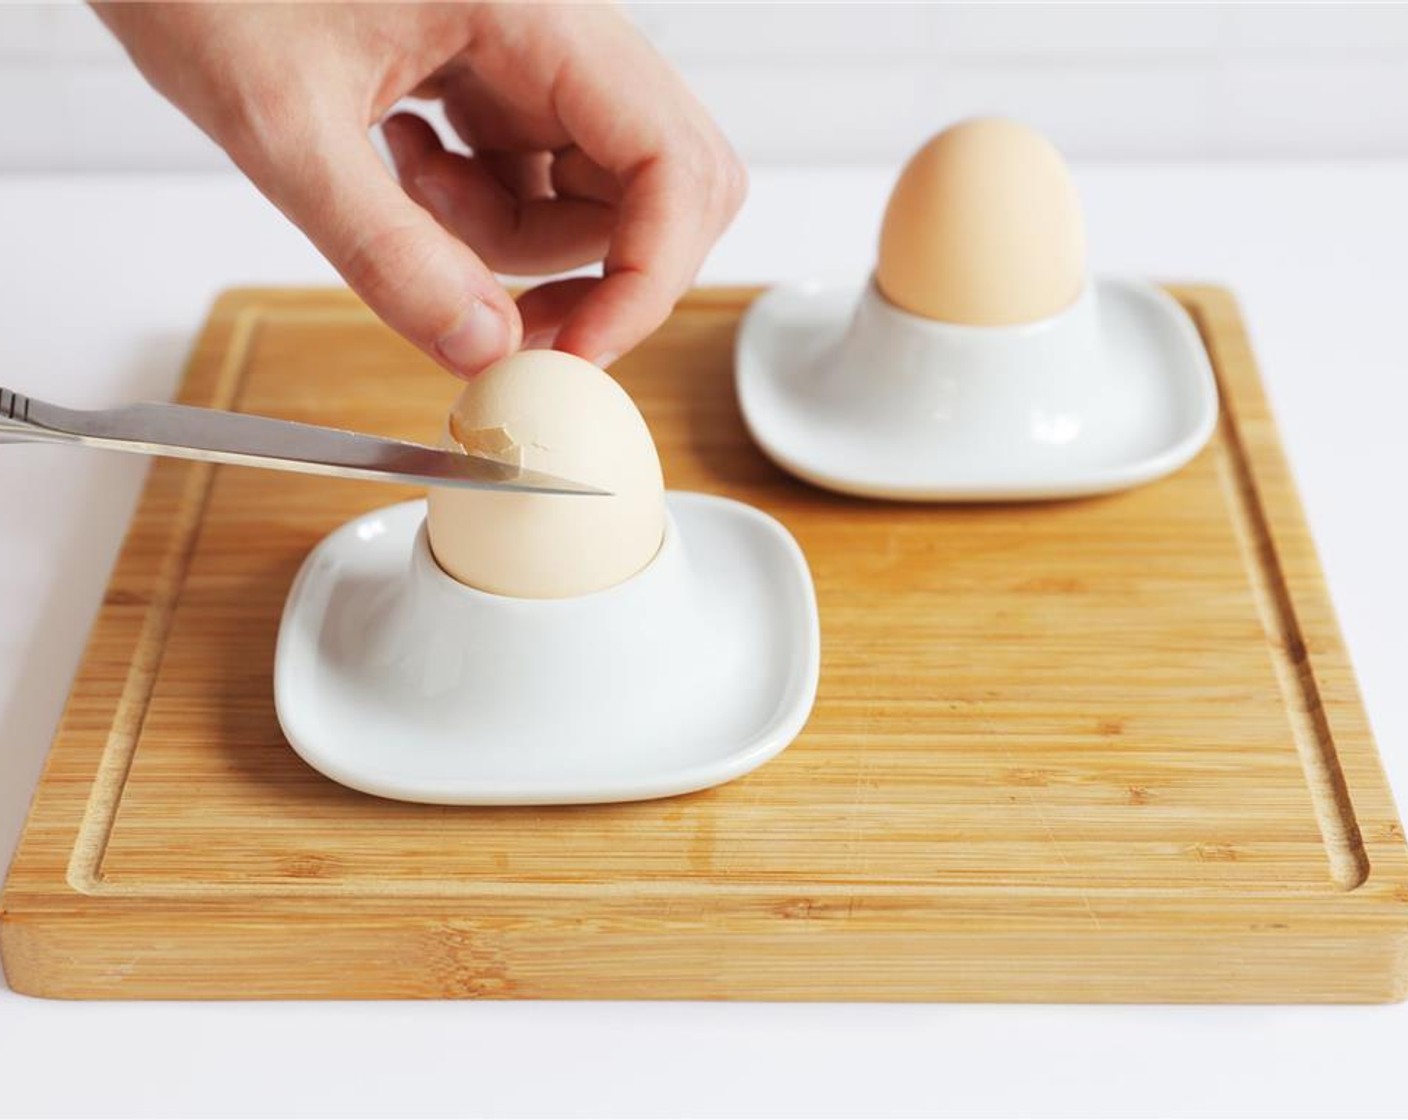 step 4 Gently remove eggs, slice off the top, and serve immediately.